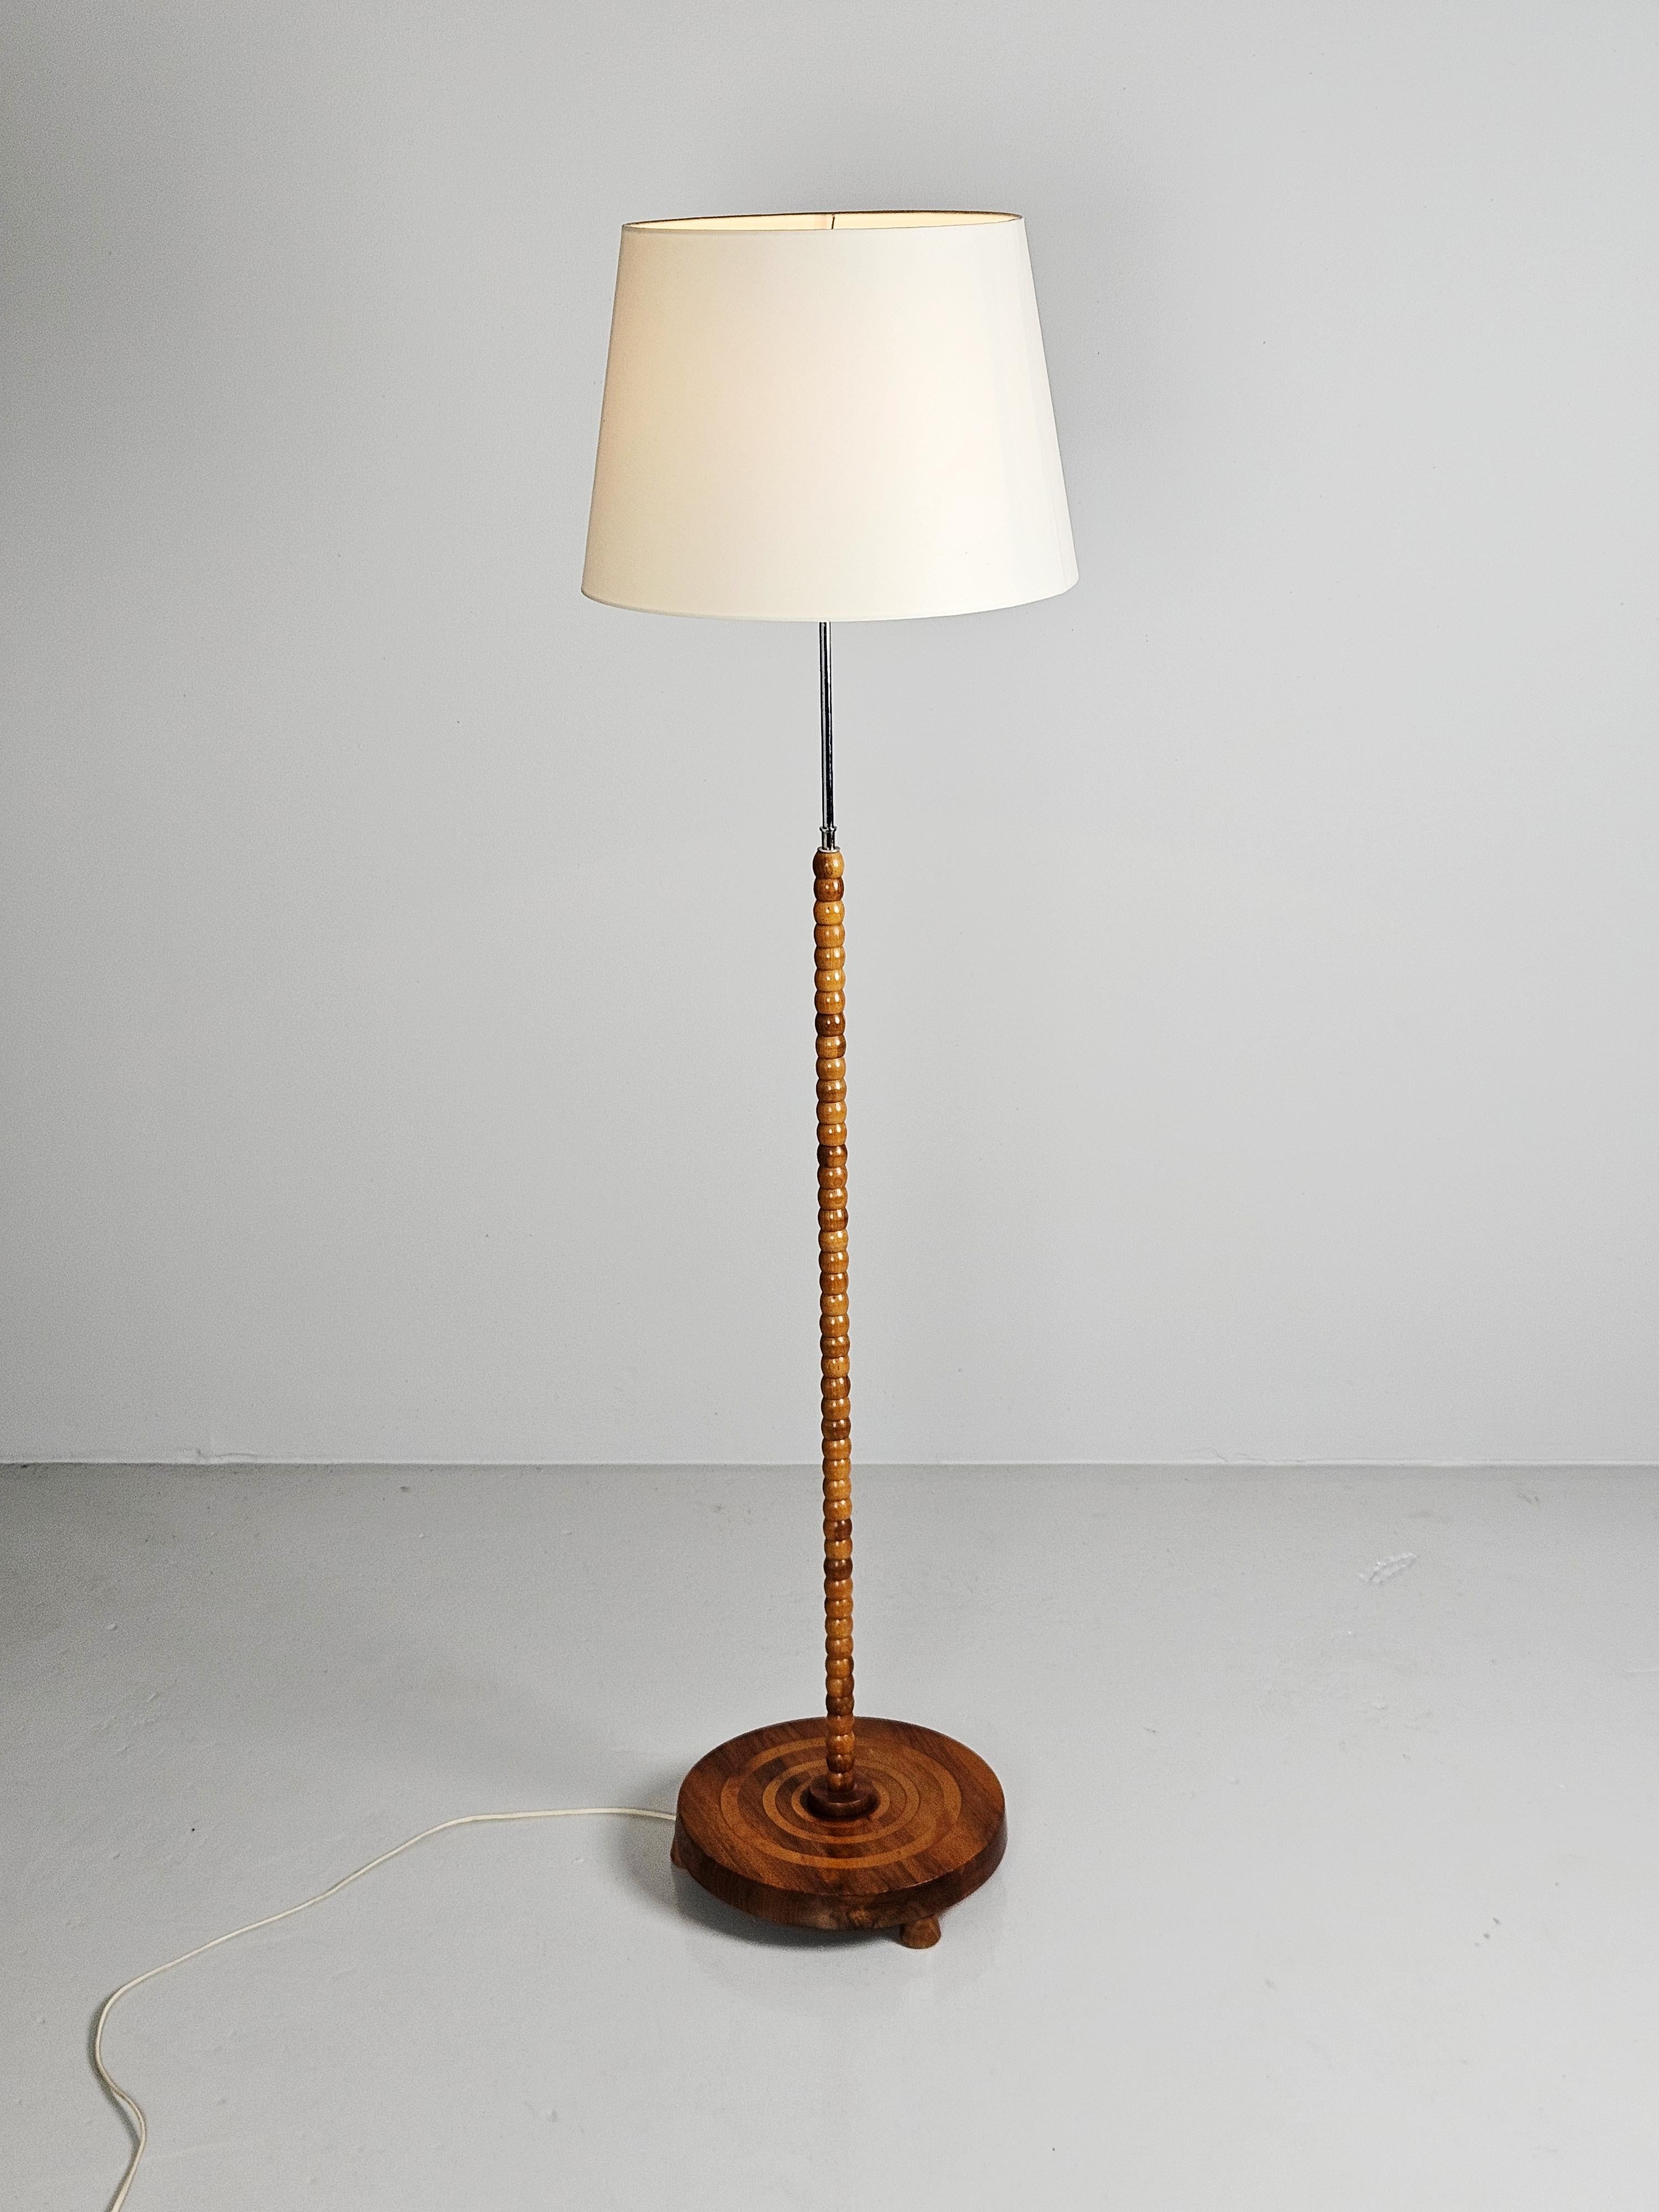 Beautiful Swedish modern floor lamp made in the middle of the 20th century. 

Modernistic design with steel and Great wood details.